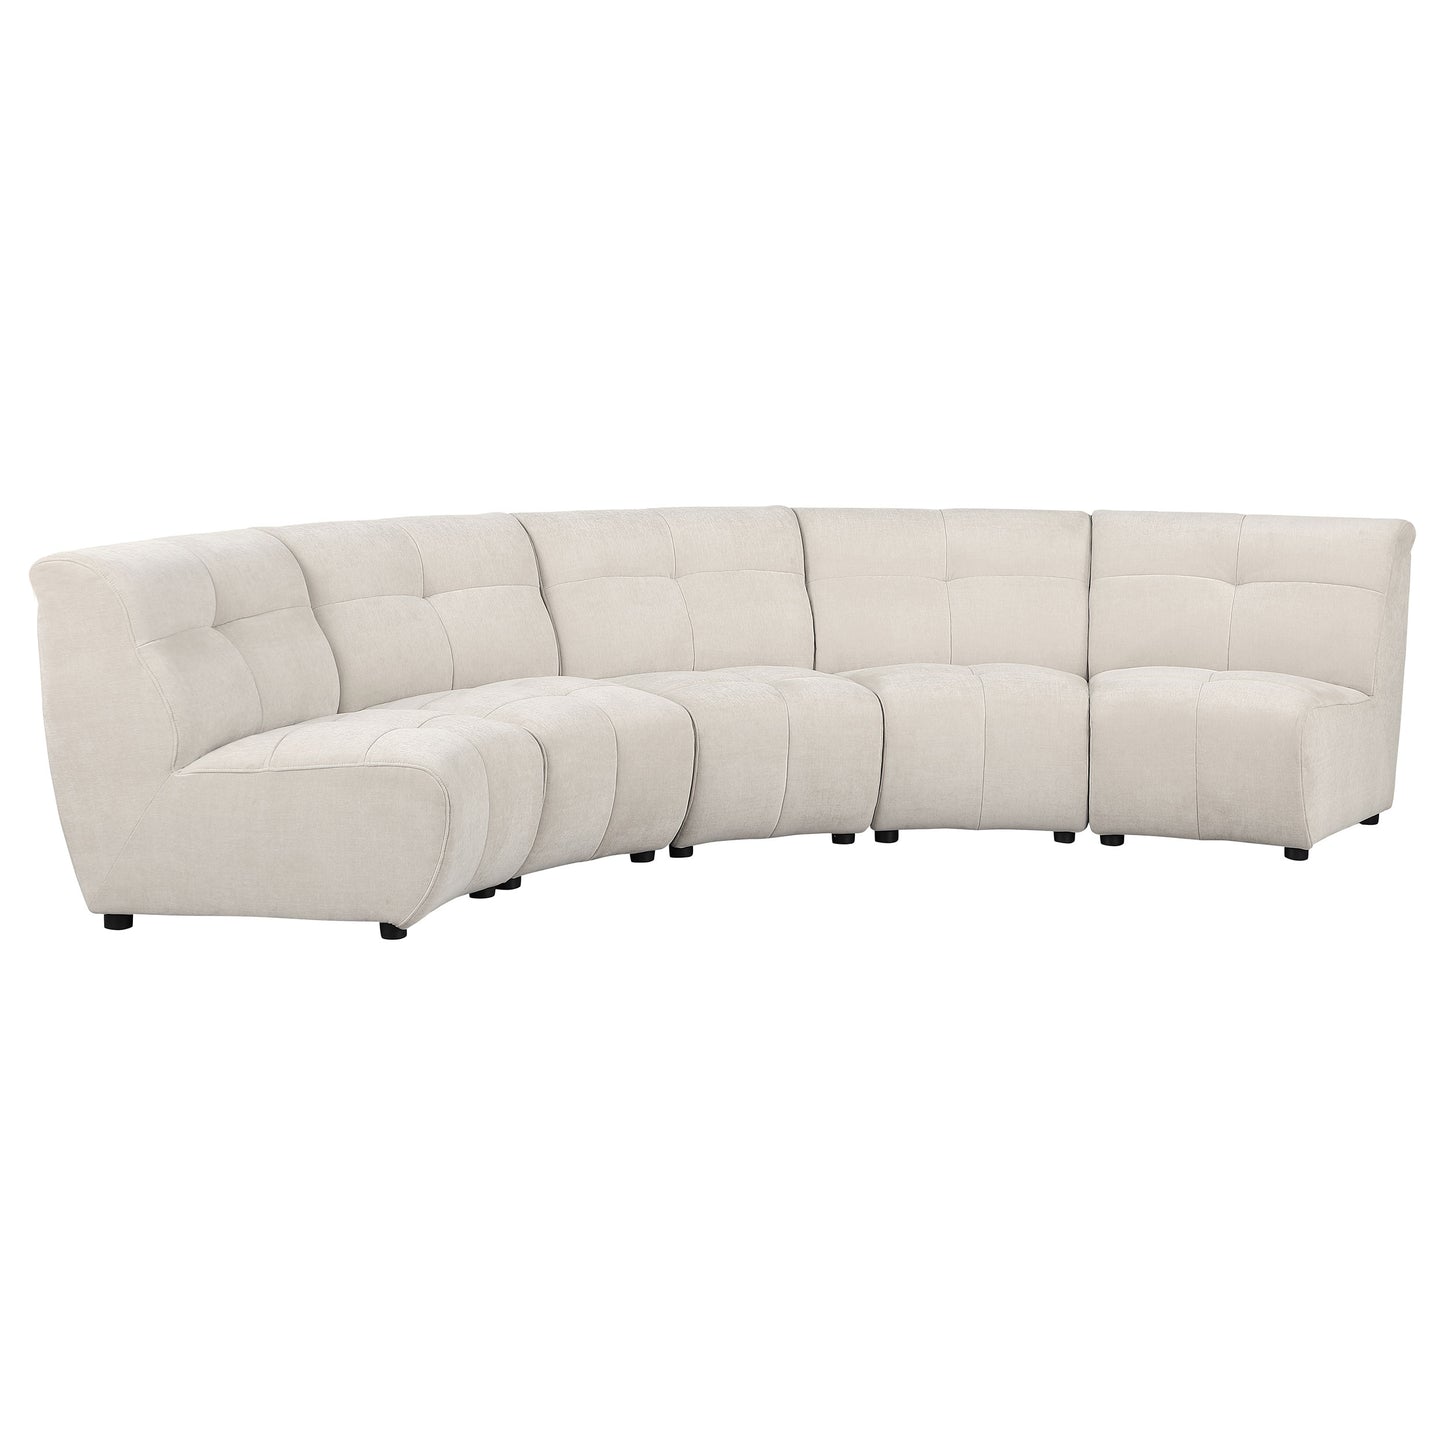 Charlotte 5-piece Upholstered Curved Modular Sectional Sofa Ivory